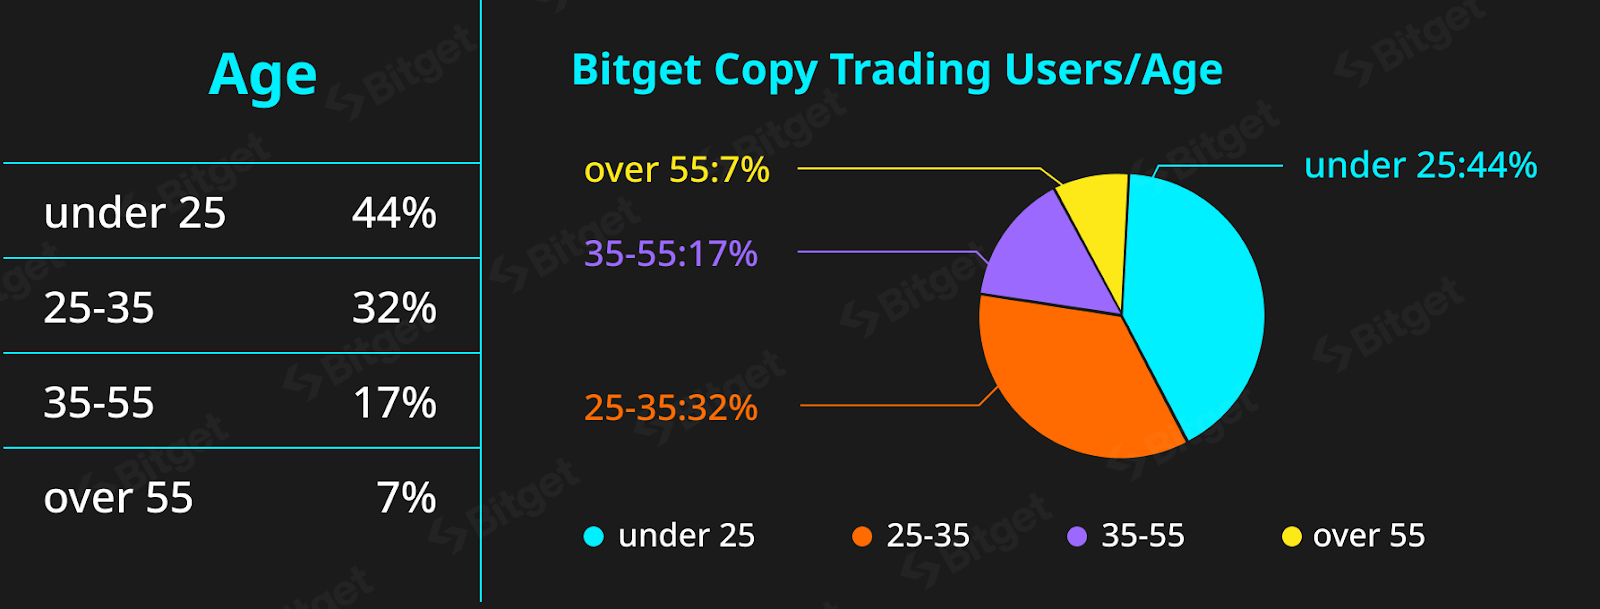 Gen-Z users dominate crypto trading. Source: Bitget